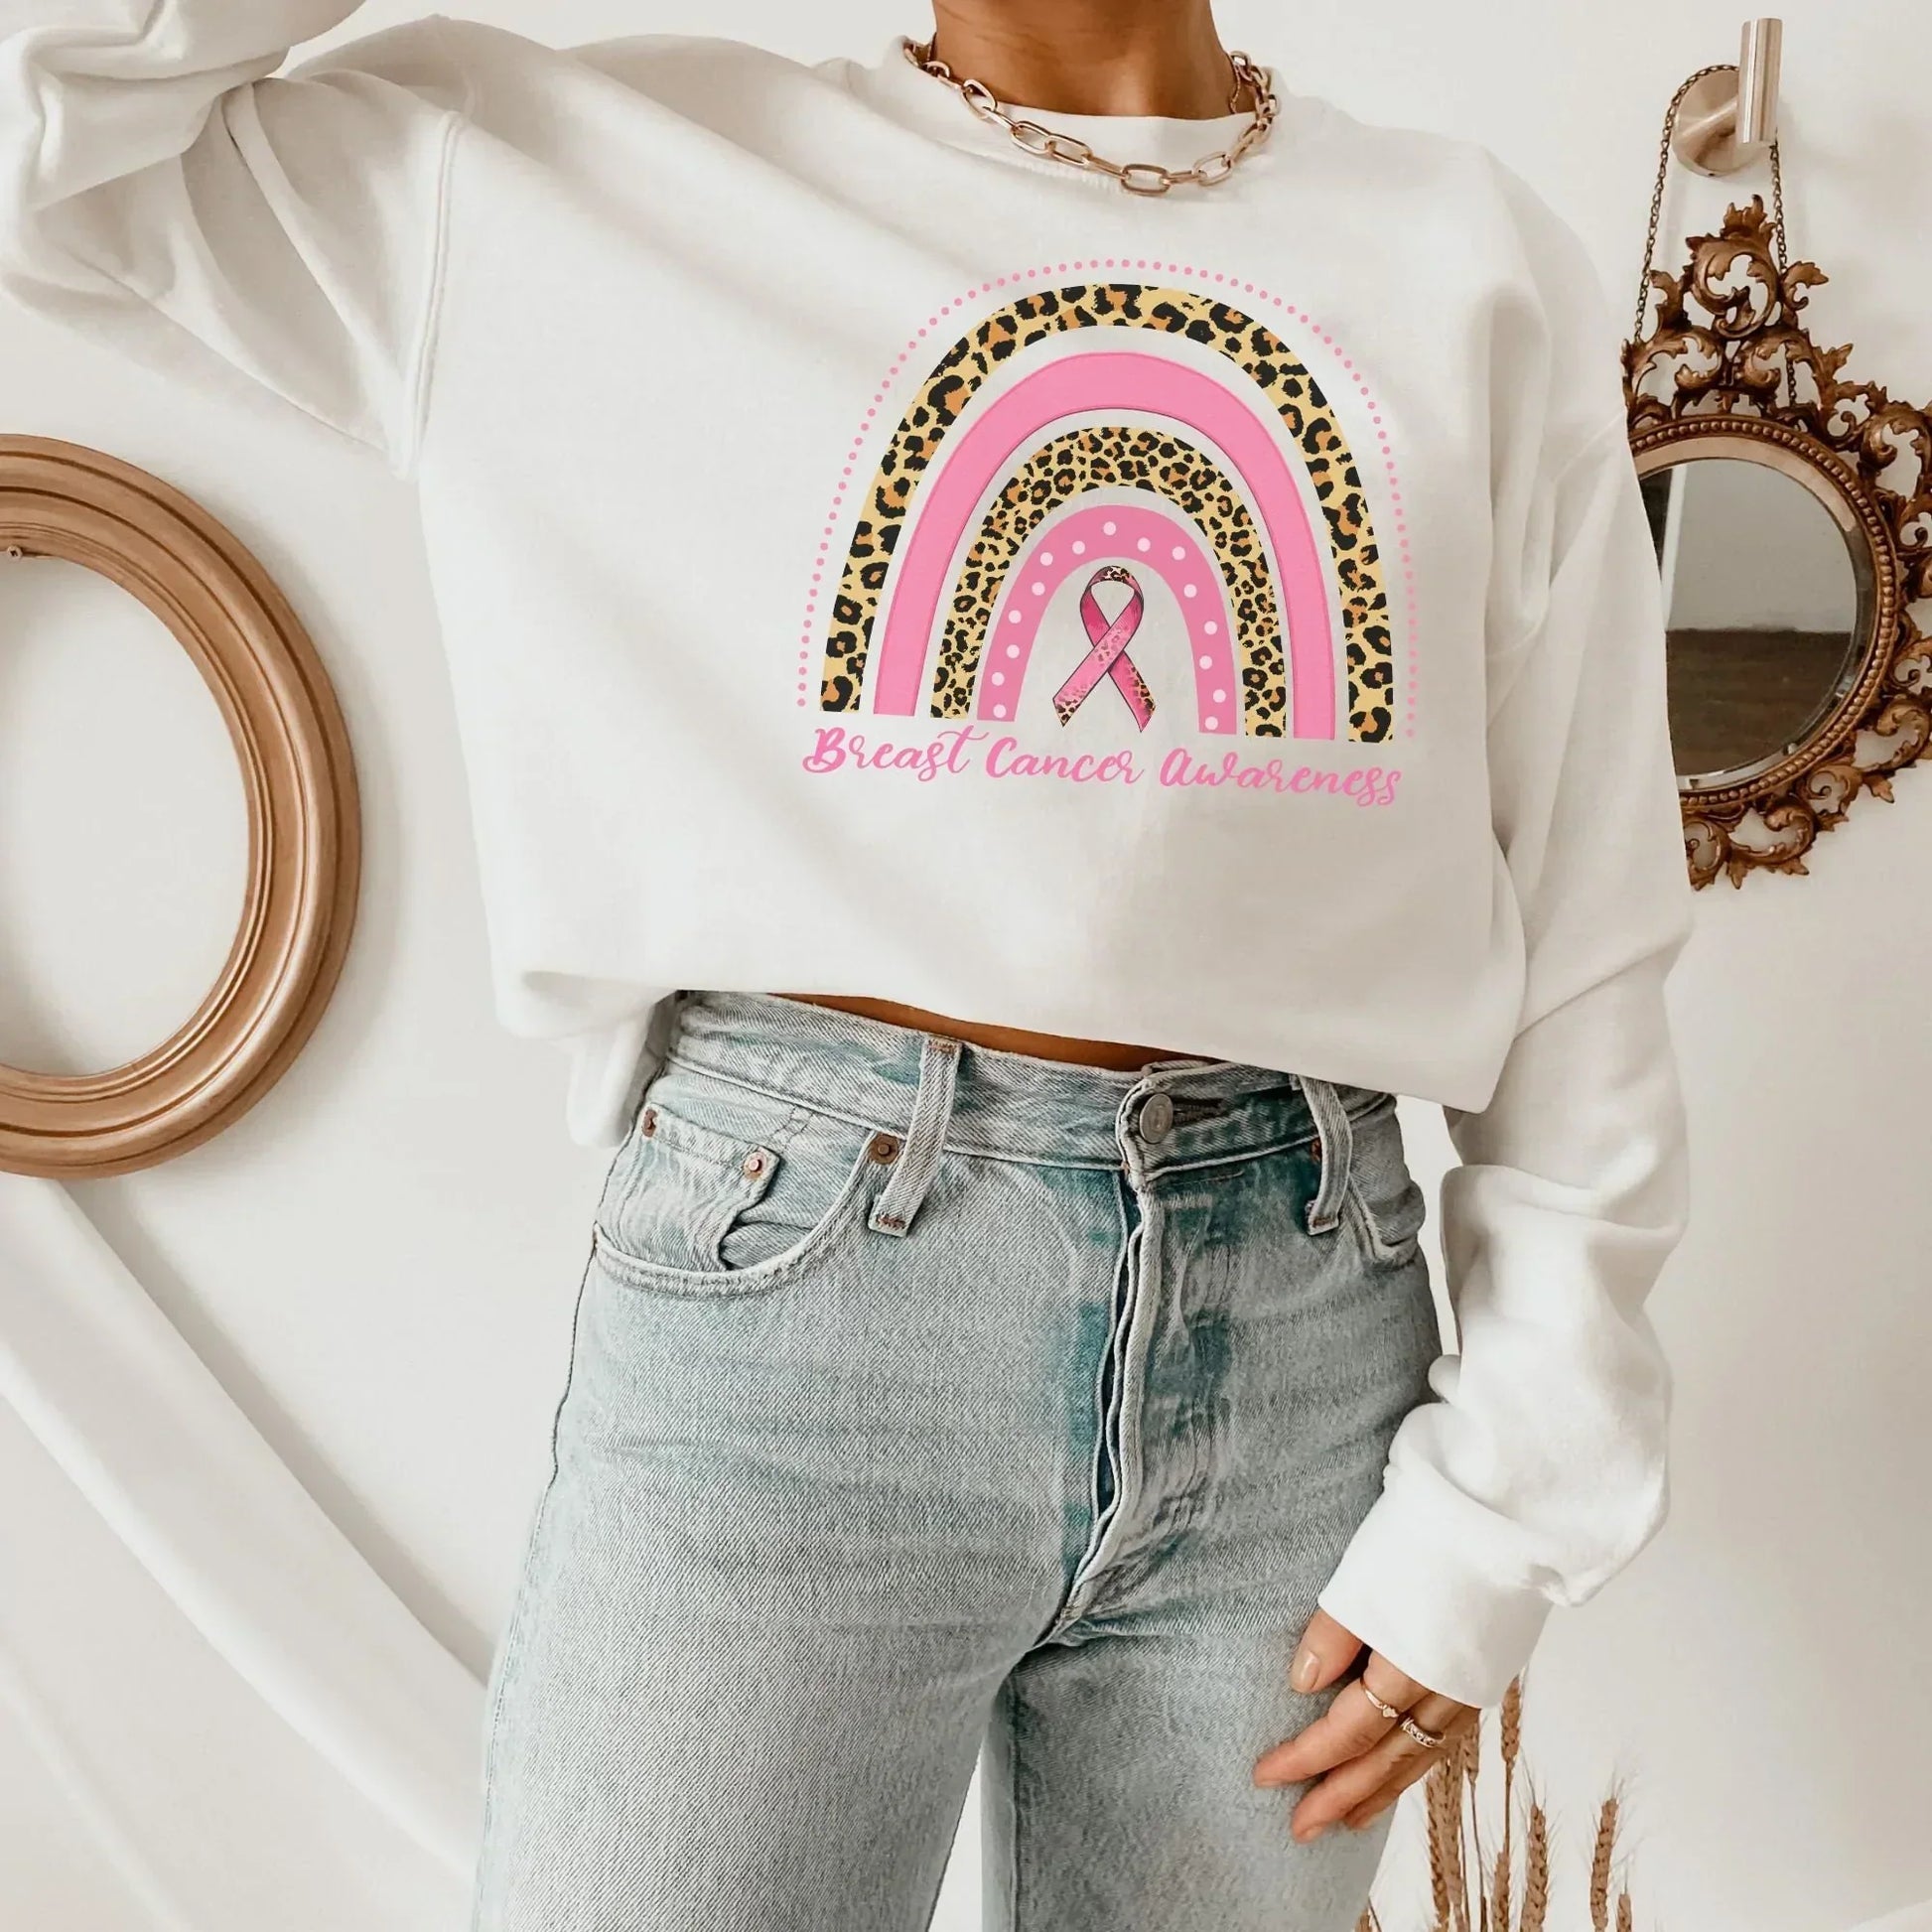 Breast Cancer Shirt, Never Give Up, Breast Cancer Gifts, Cancer Survivor Sweatshirt, Wear Pink in October Awareness Month, Rainbow Hoodie HMDesignStudioUS